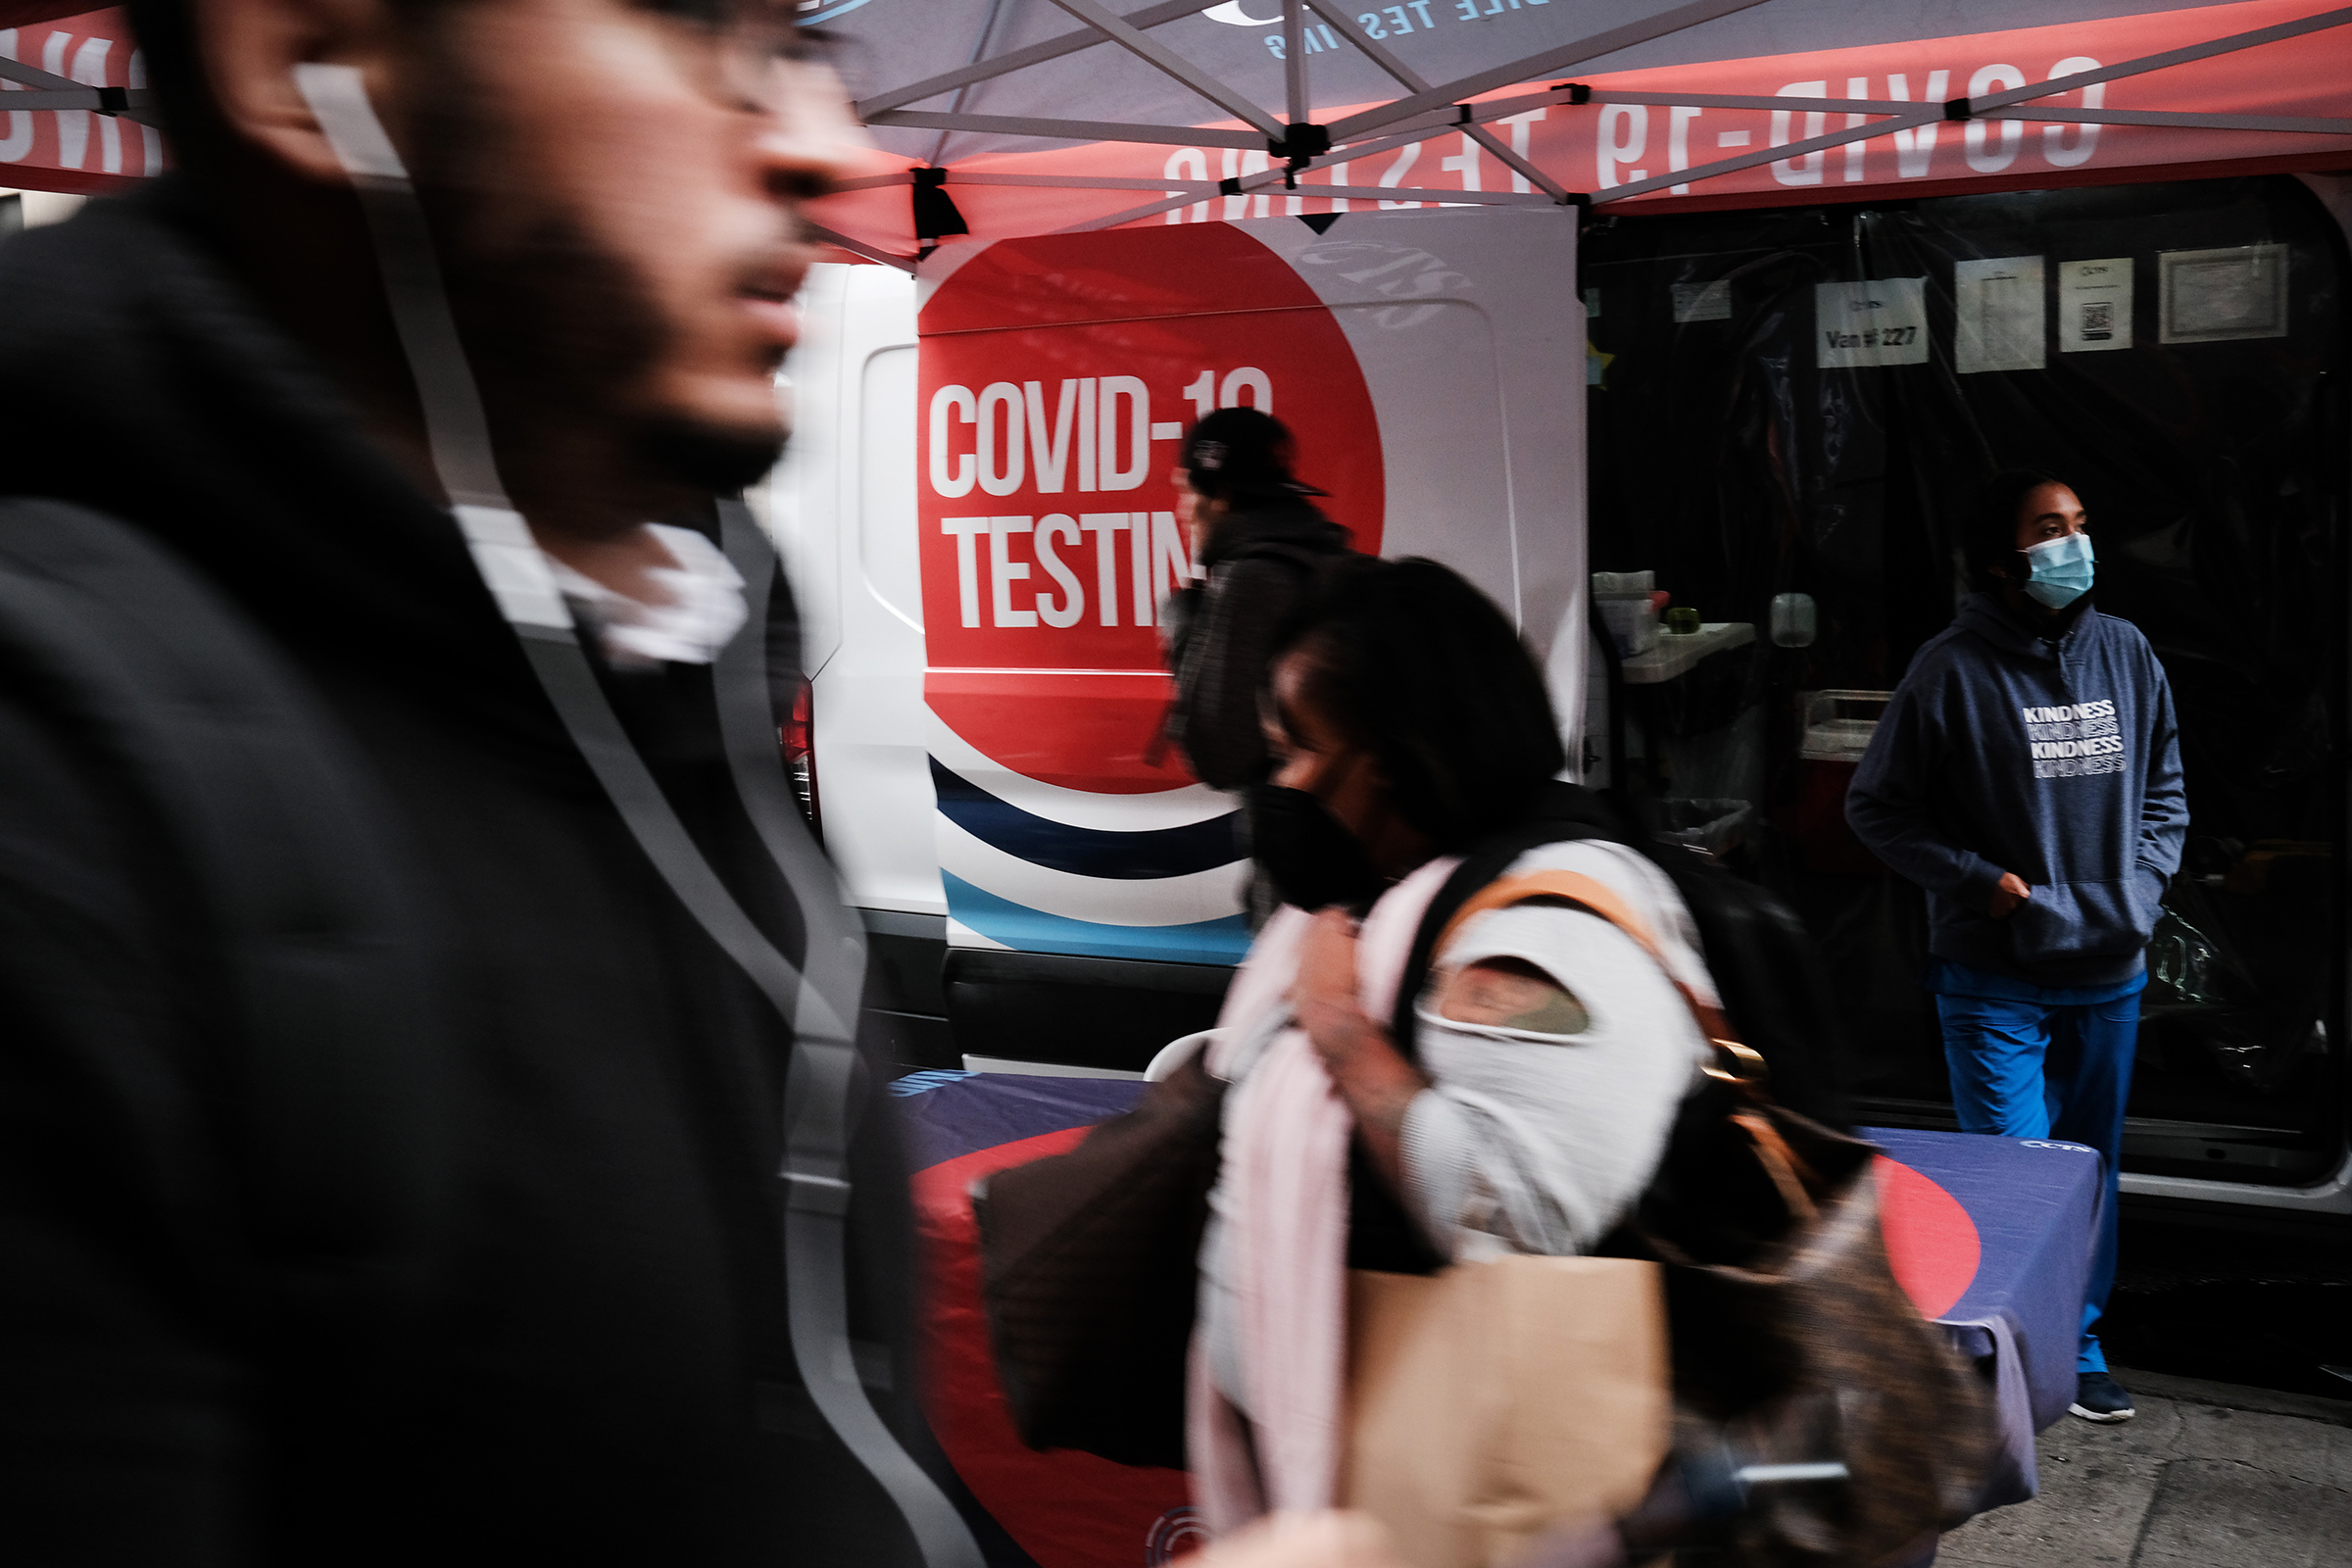 A Covid-19 pop-up testing sits stands on a New York City street on Oct. 26, 2021.